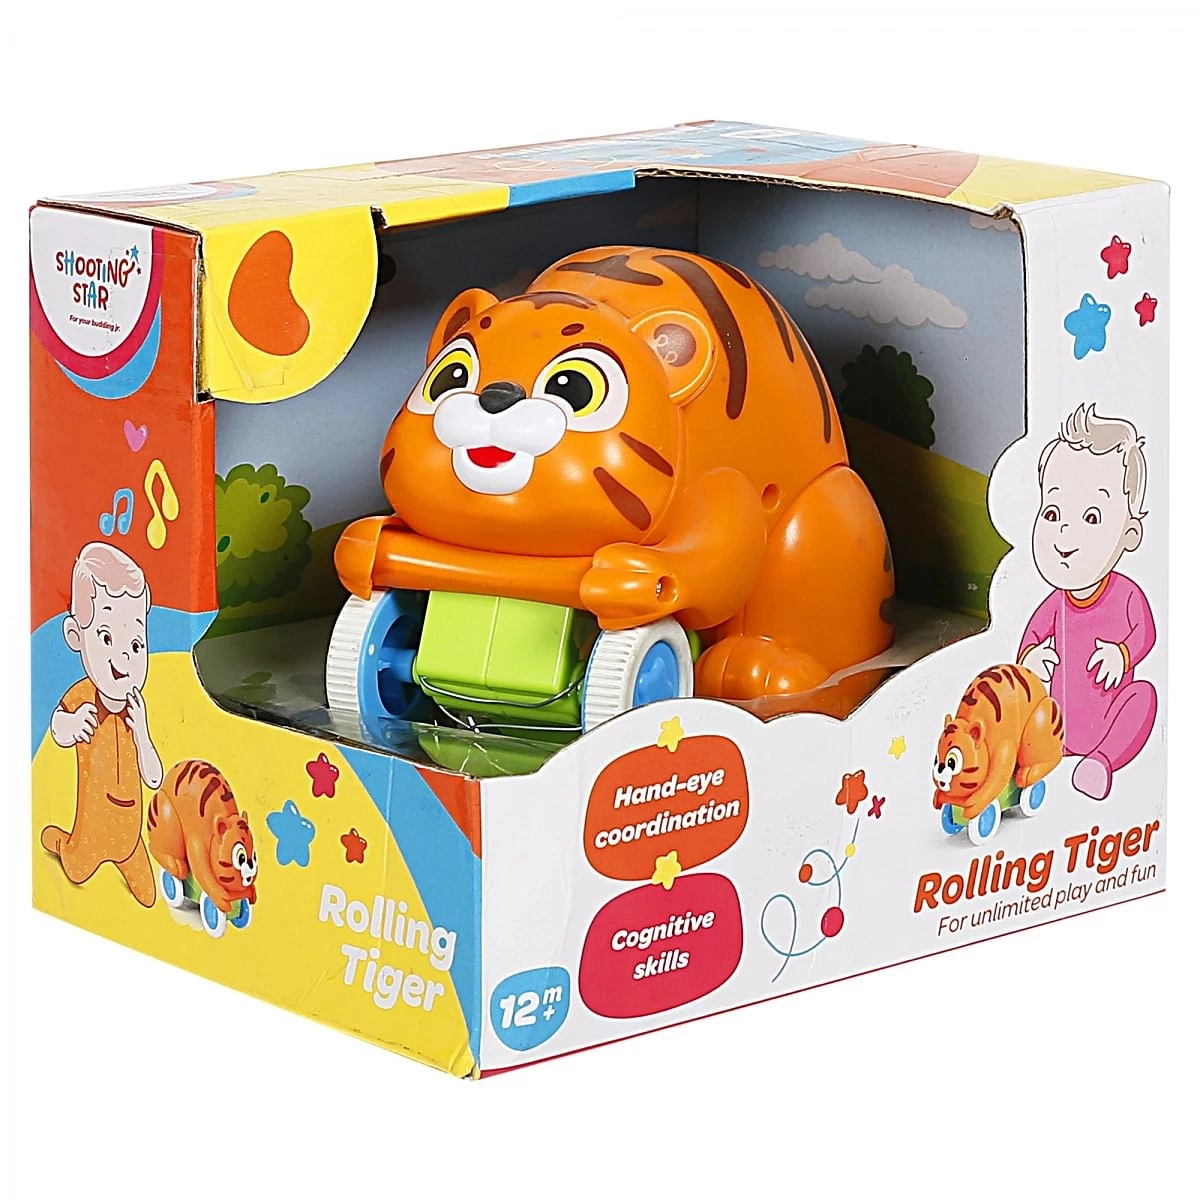 Shooting Star Rolling Tiger for Unlimited Play & Fun, Orange, 12M+